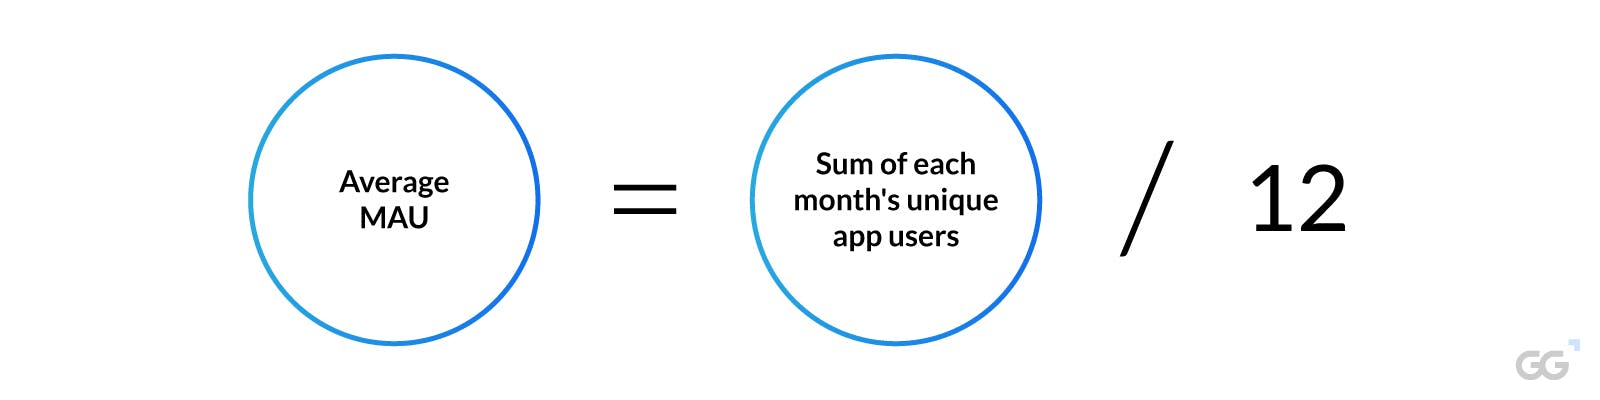 Infographic to calculate average MAU says "Average MAU = Sum of each month's unique app users / 12"